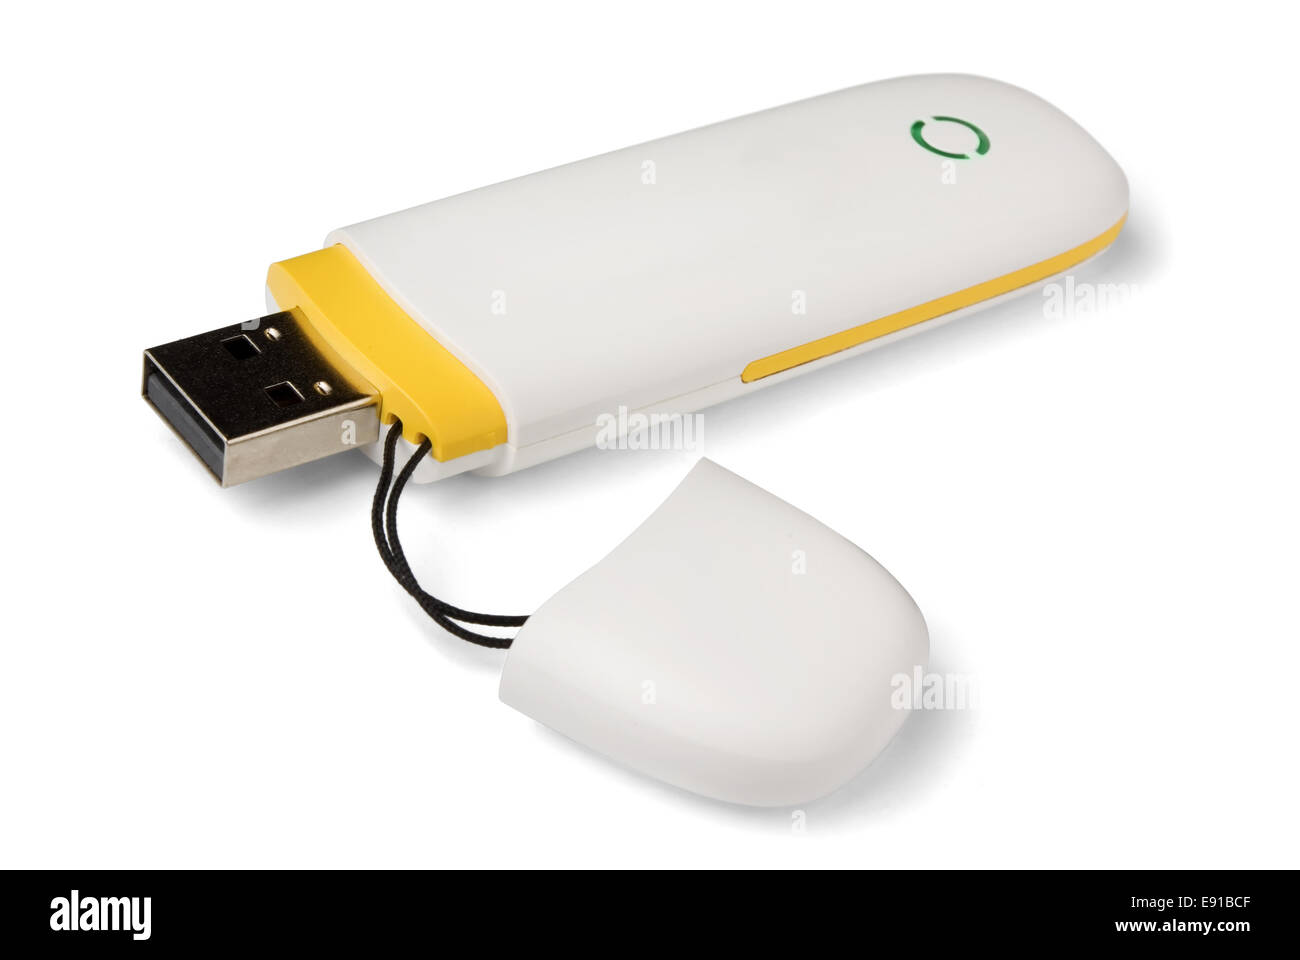 Wifi Dongle High Resolution Stock Photography and Images - Alamy